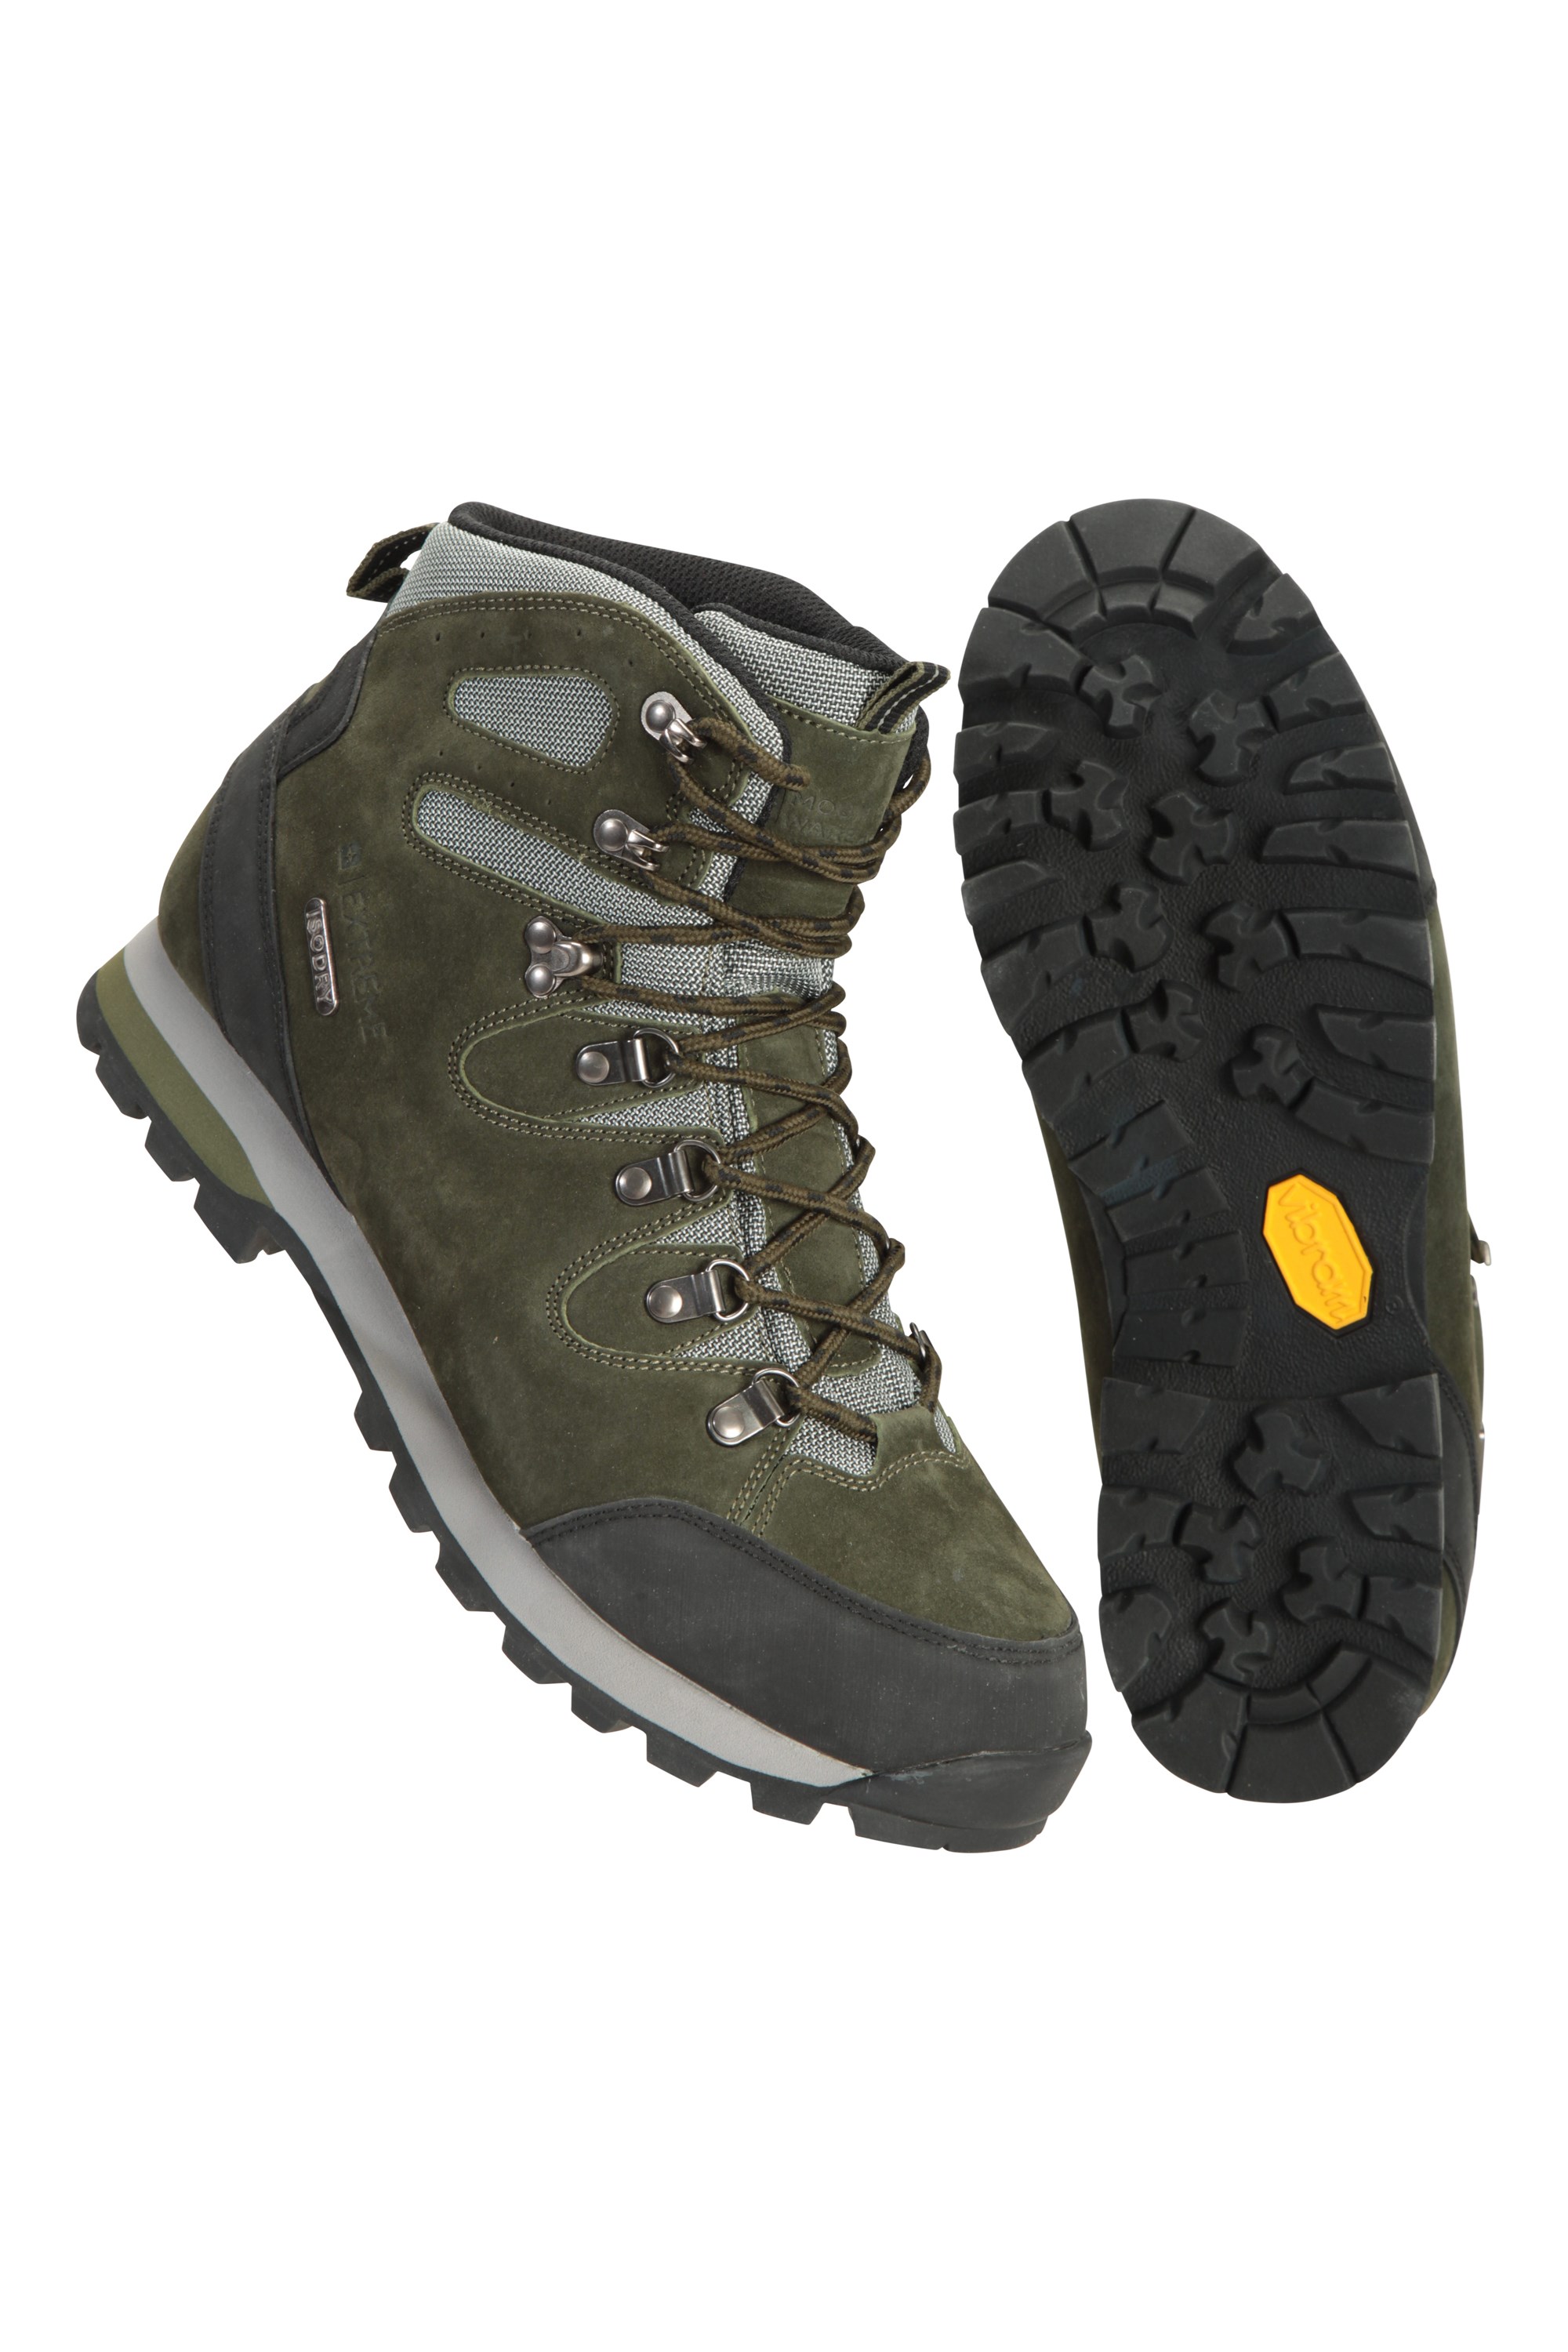 Extreme Excursion Mens Waterproof Vibram Boots - Green